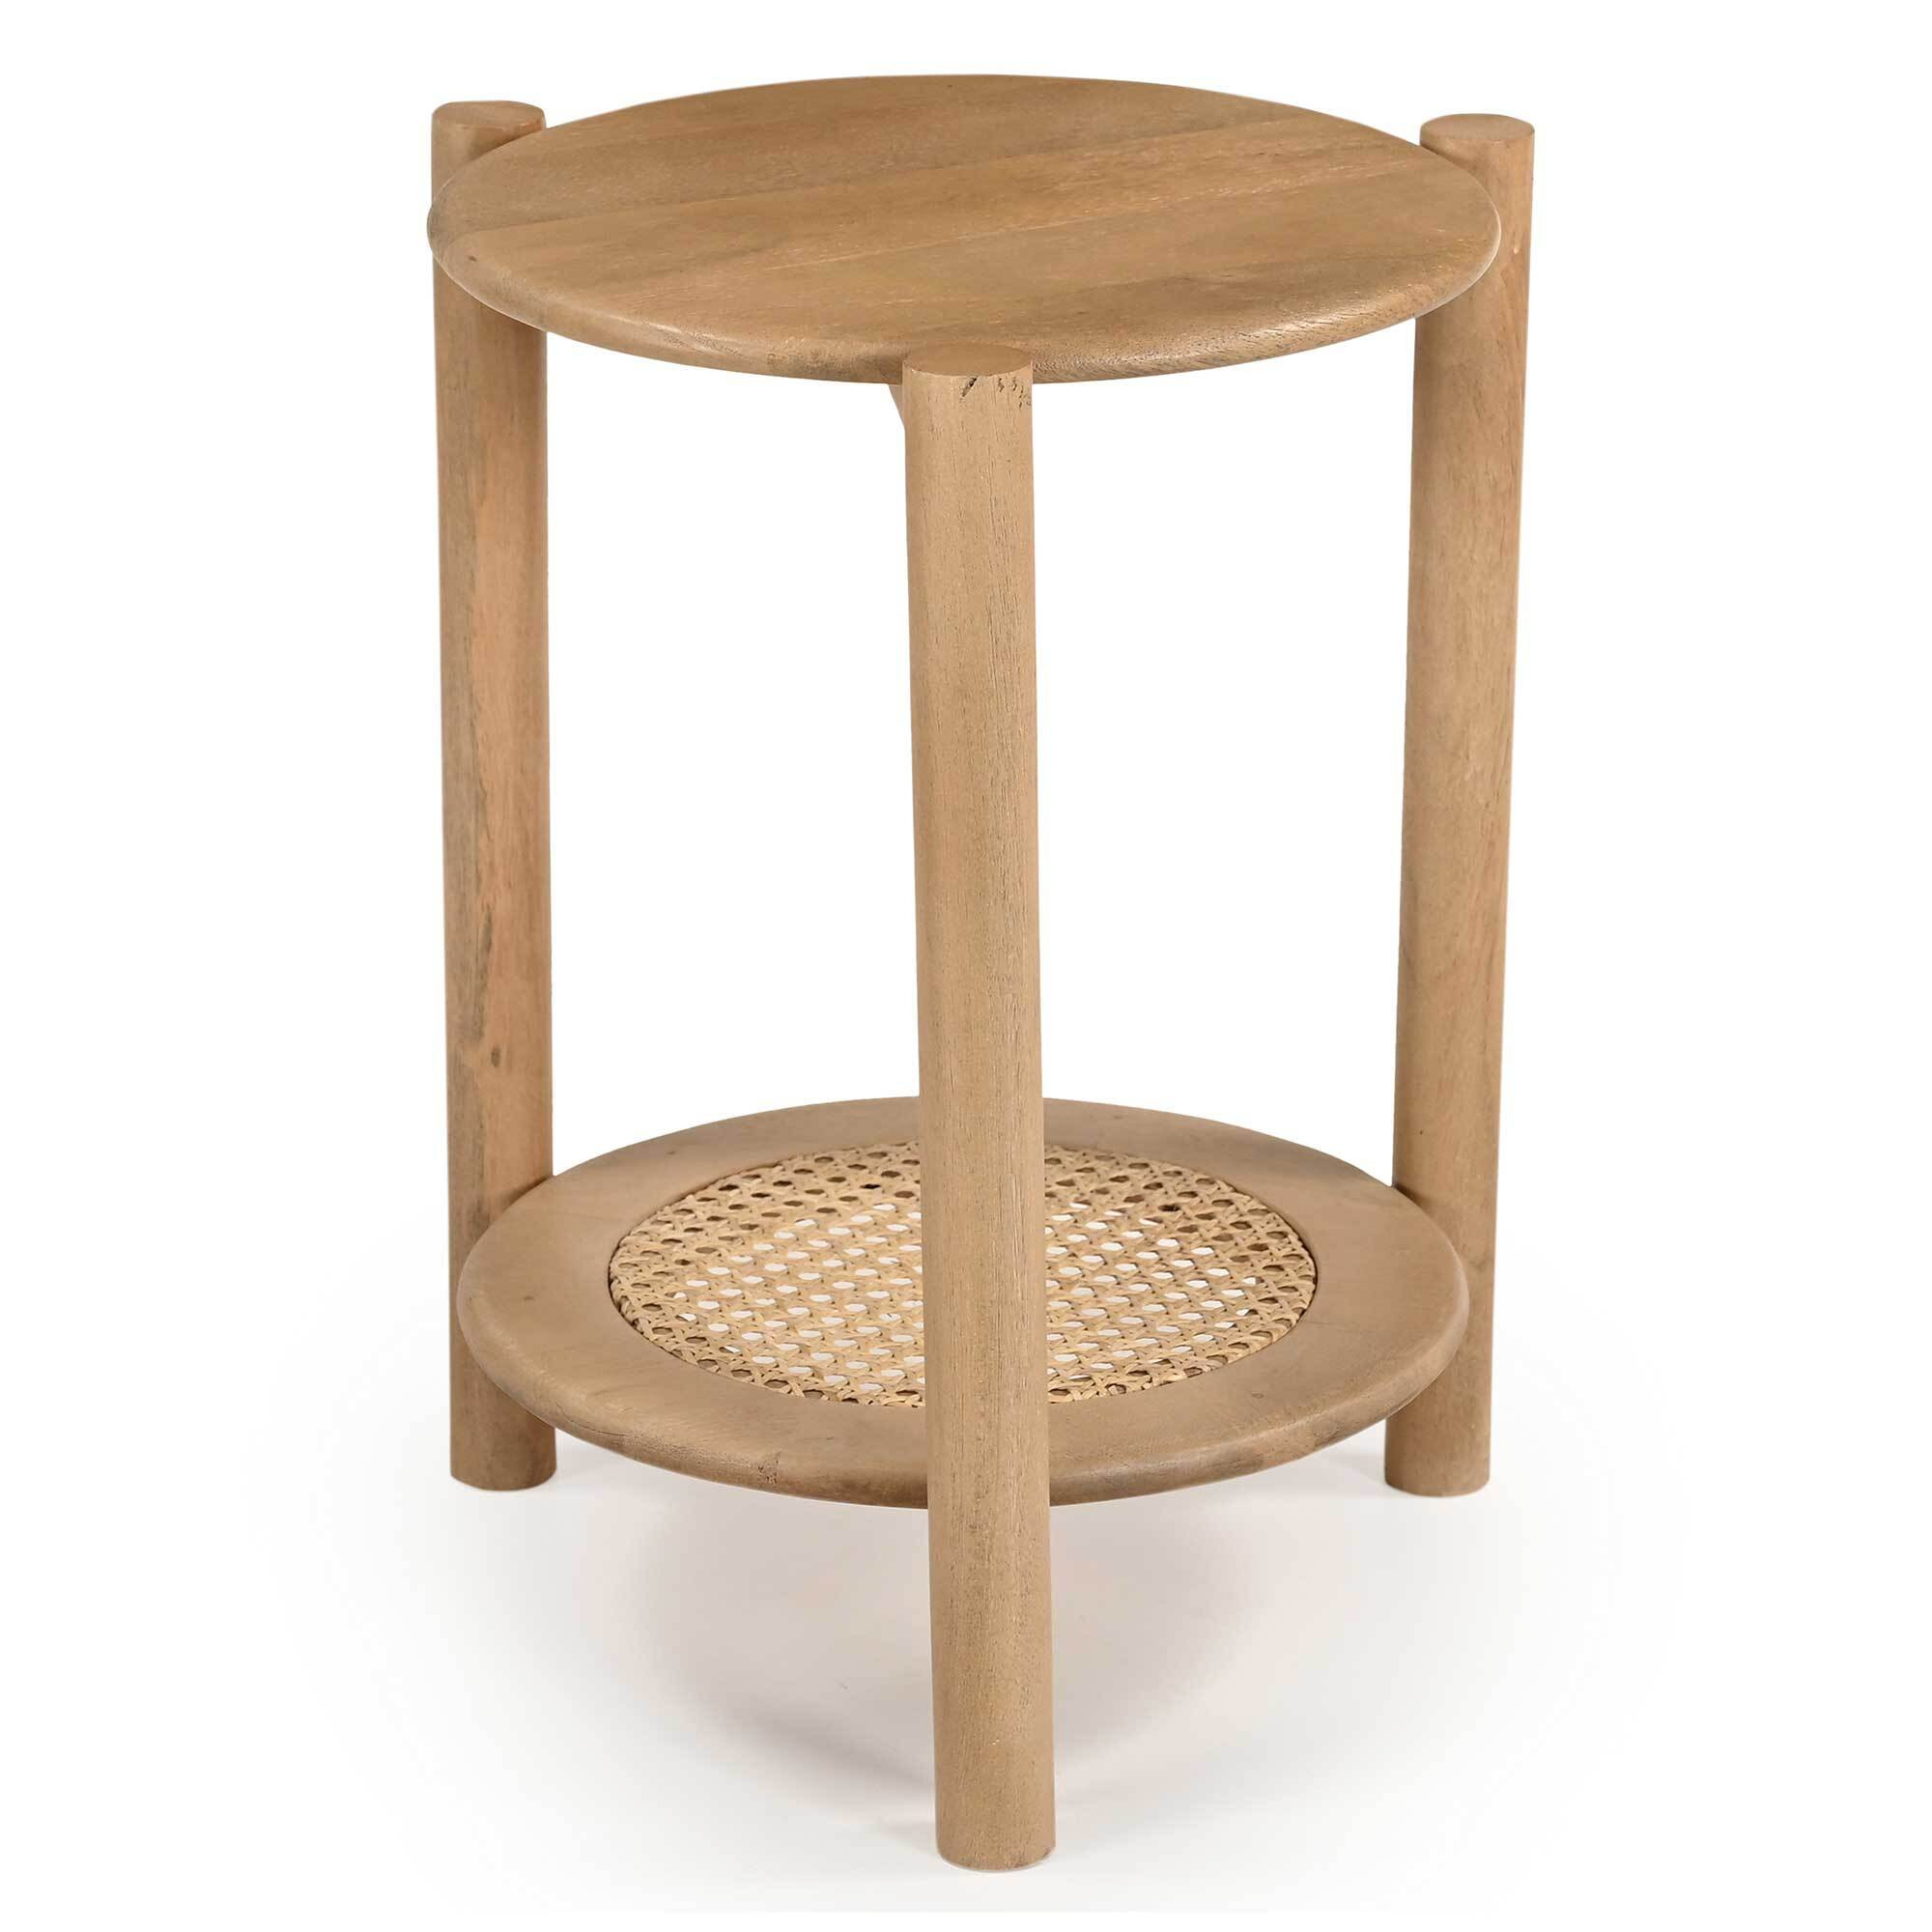 Zen Natural Side Table 37cm, Round, Neutral Wood - Barker & Stonehouse - image 1